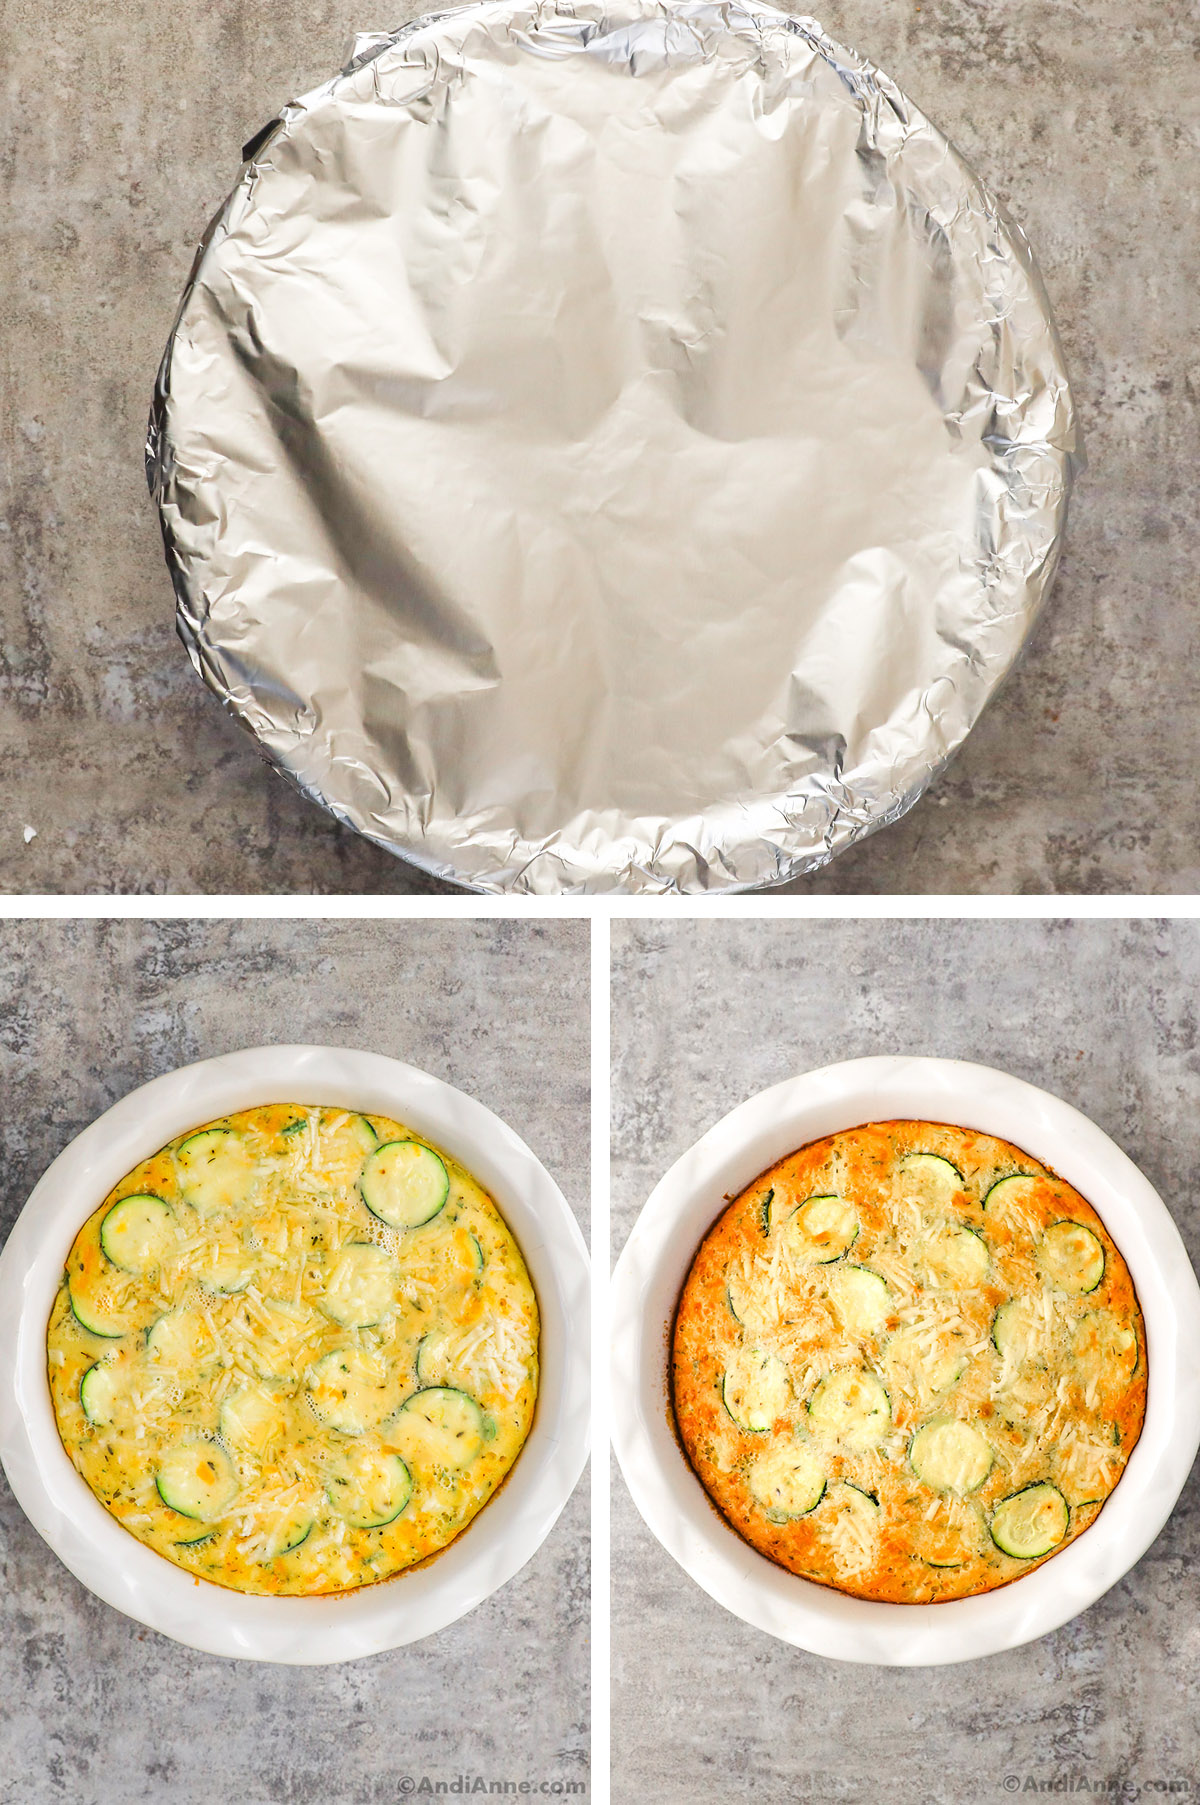 Pie dish covered with foil, second is zucchini pie with slices and shredded parmesan sprinkled on top. Fourth is fully cooked zucchini pie. 